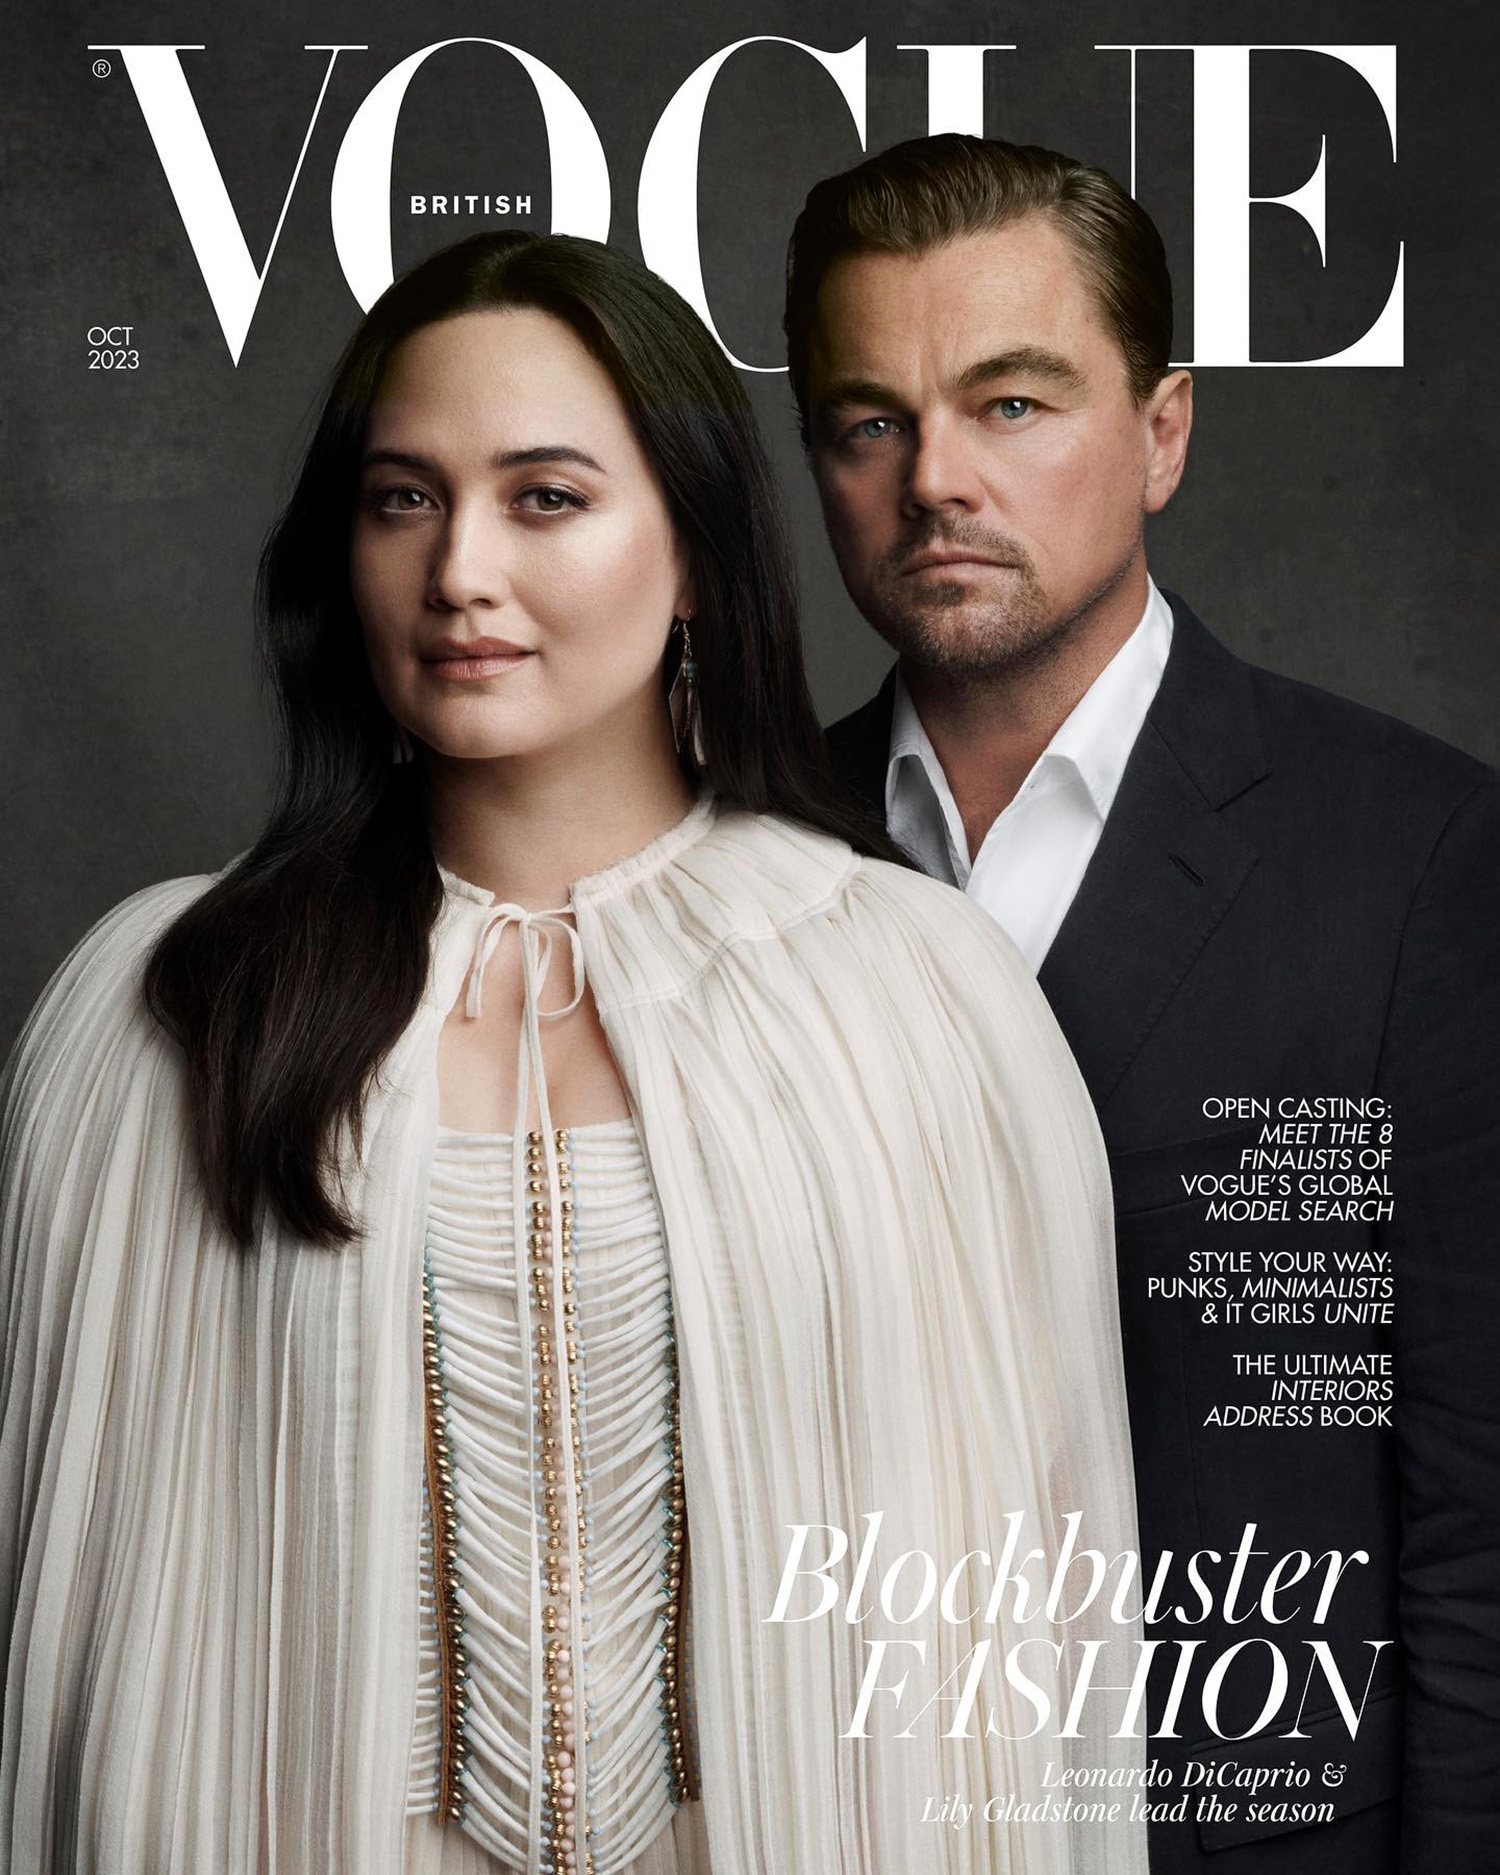 Leonardo DiCaprio and Lily Gladstone cover British Vogue October 2023 by Craig McDean